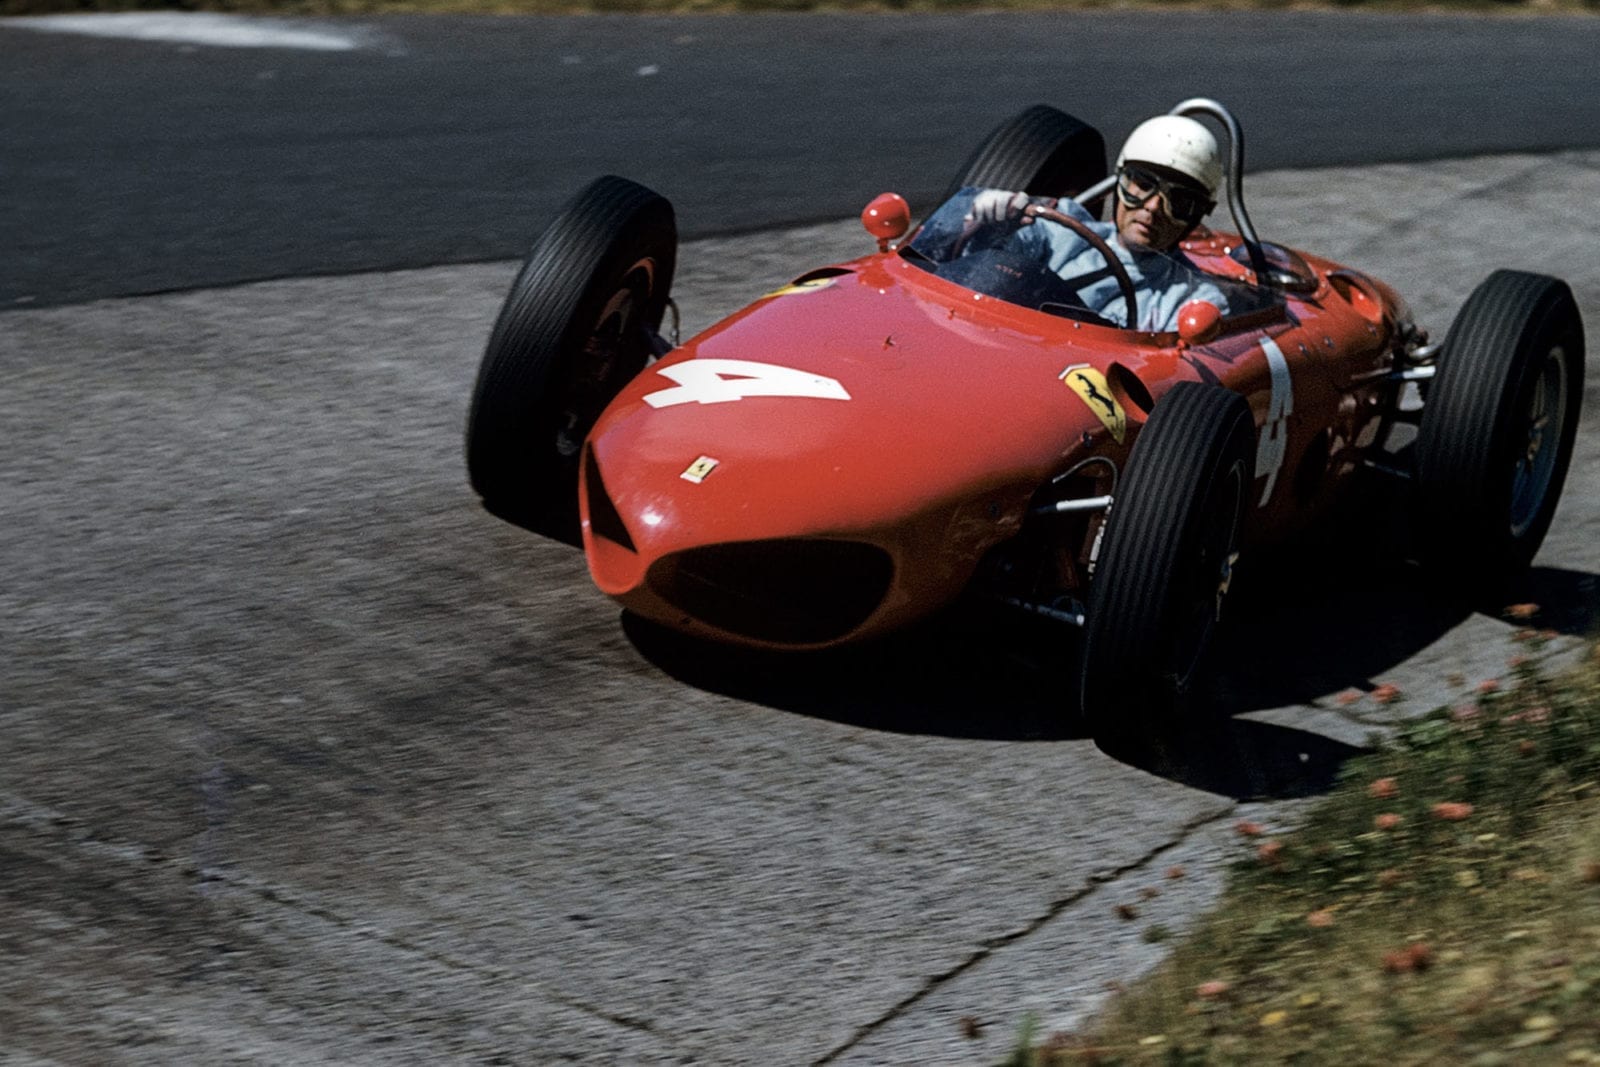 Phil Hill, Ferrari 156 Sharknose, Grand Prix of Germany, Nurburgring, 06 August 1961. Phil Hill driving his Ferrari 156 on the famous Karussell corner at the Nürburgring. (Photo by Bernard Cahier/Getty Images)